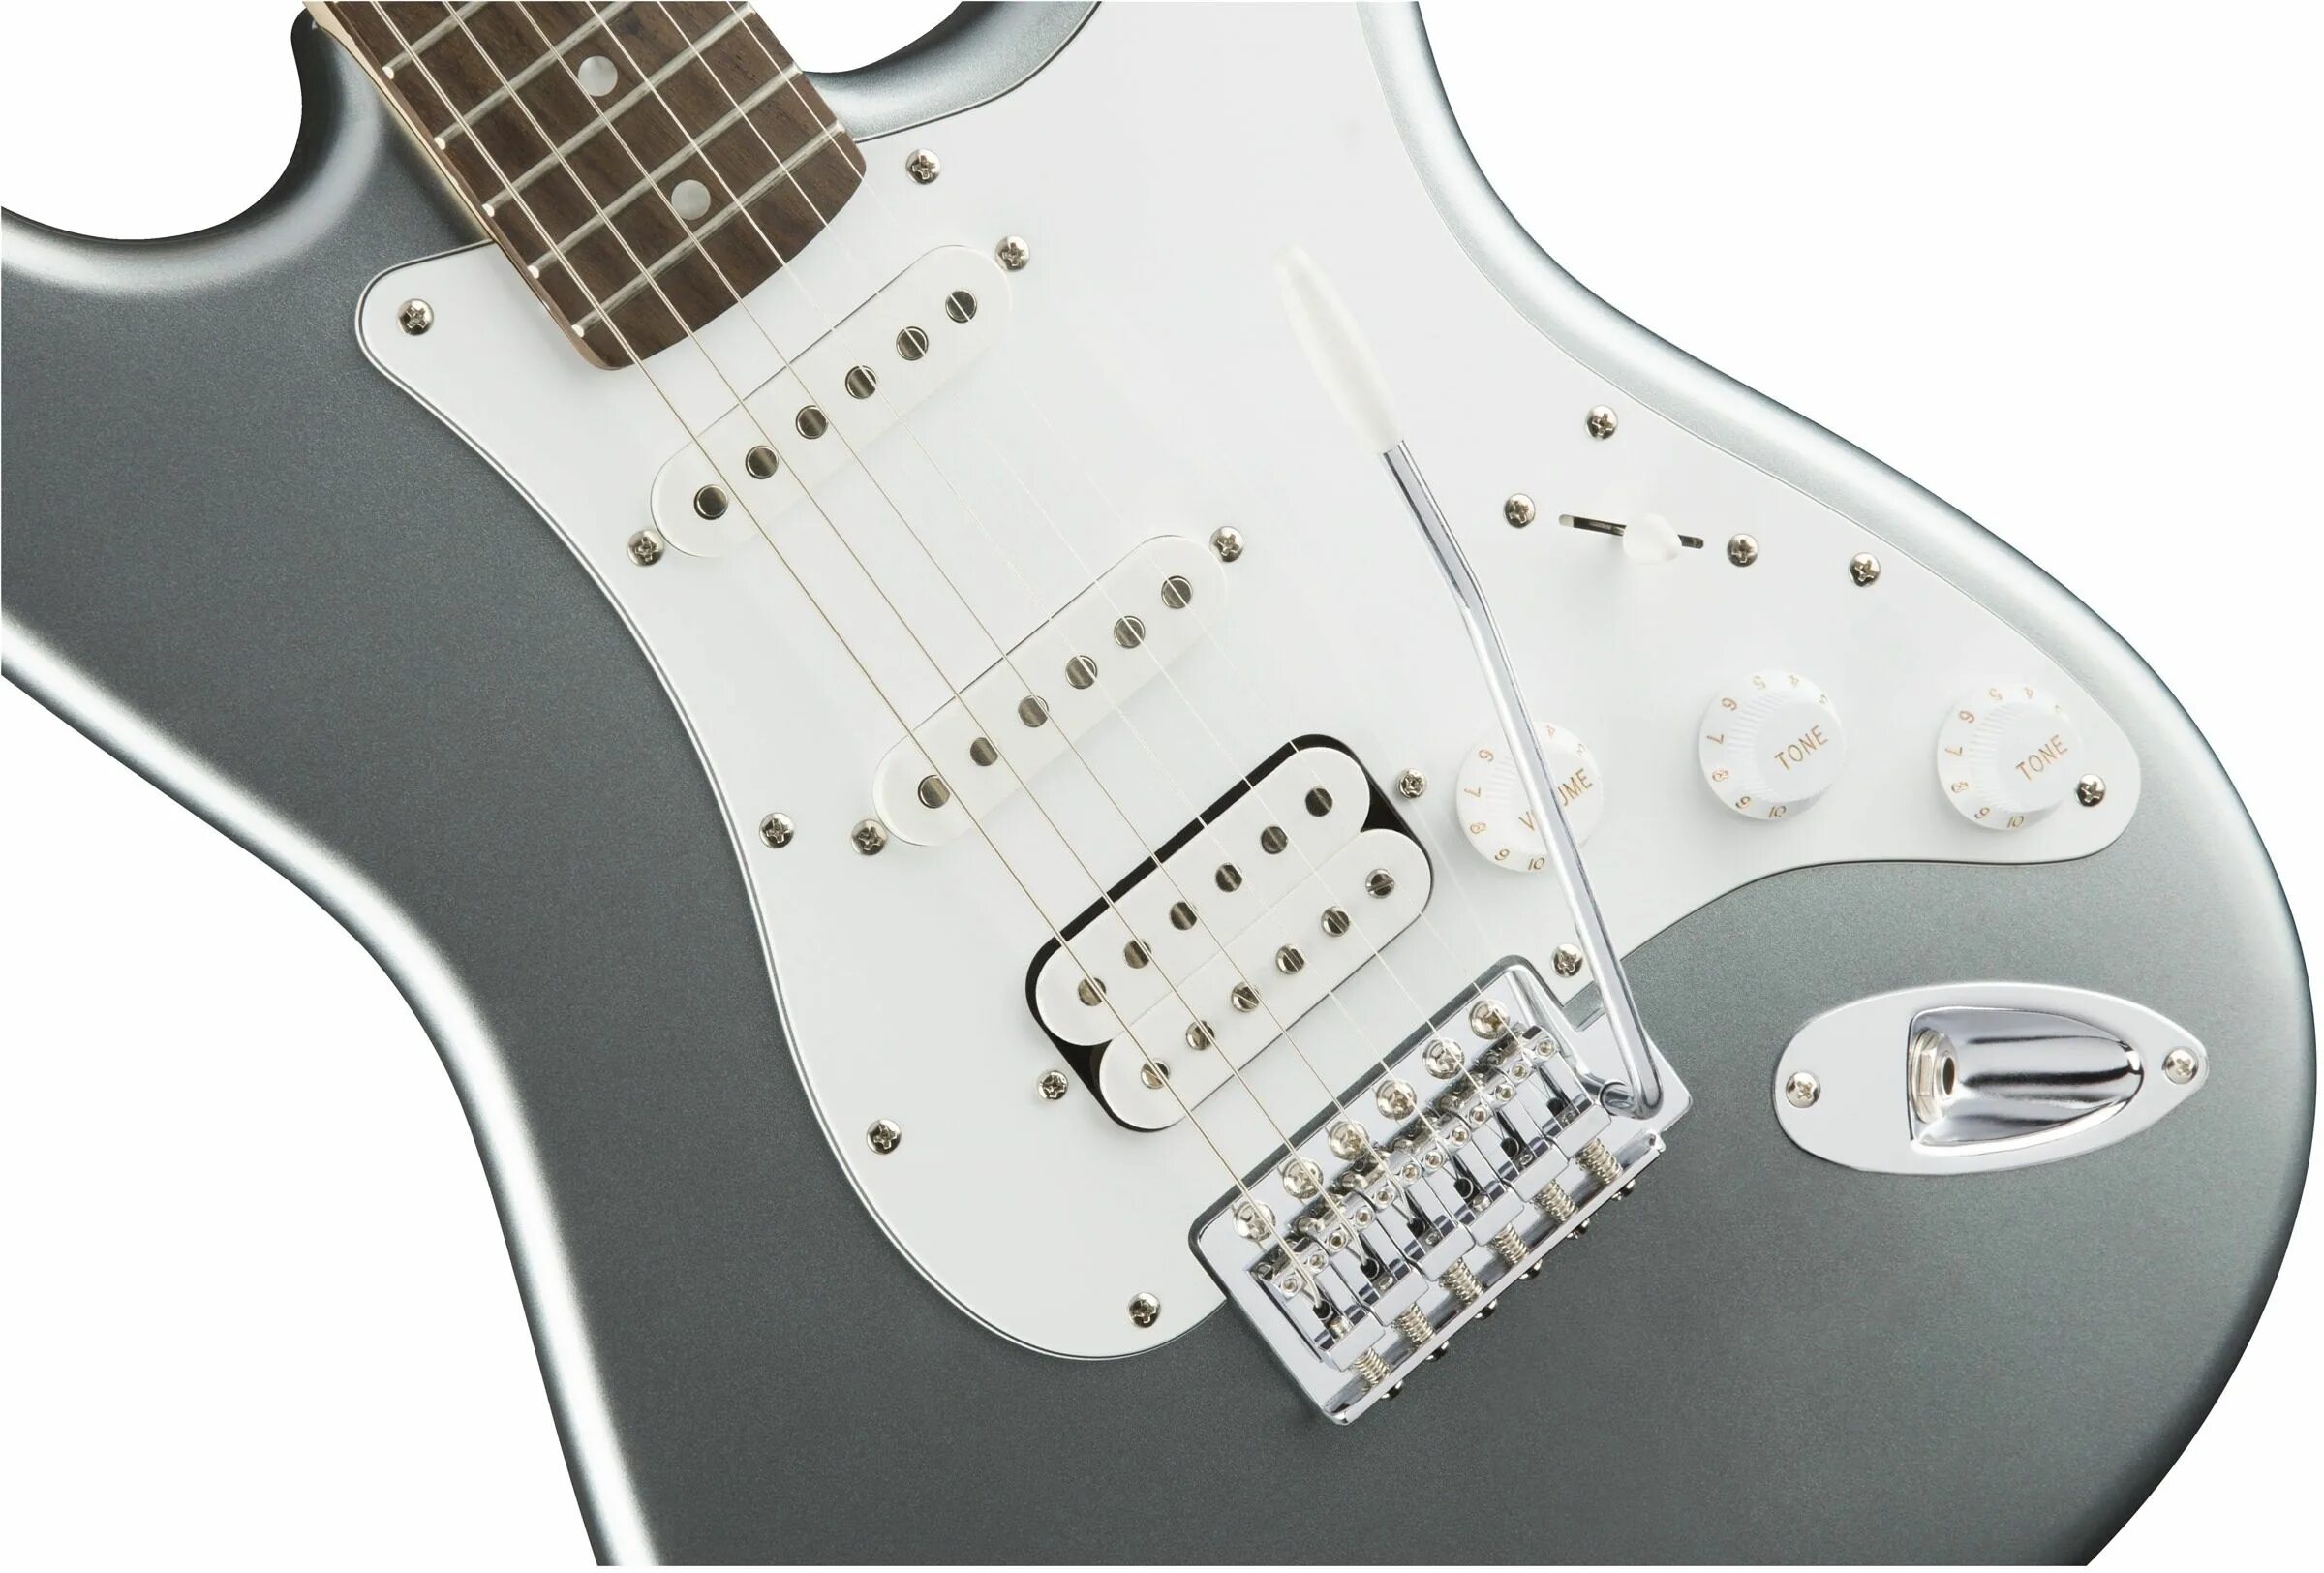 Squier affinity stratocaster. Электрогитара Squier Affinity Stratocaster. Электрогитара Fender Squier Stratocaster. Гитара Fender Squier Stratocaster Affinity. Электрогитара Fender Squier Affinity.